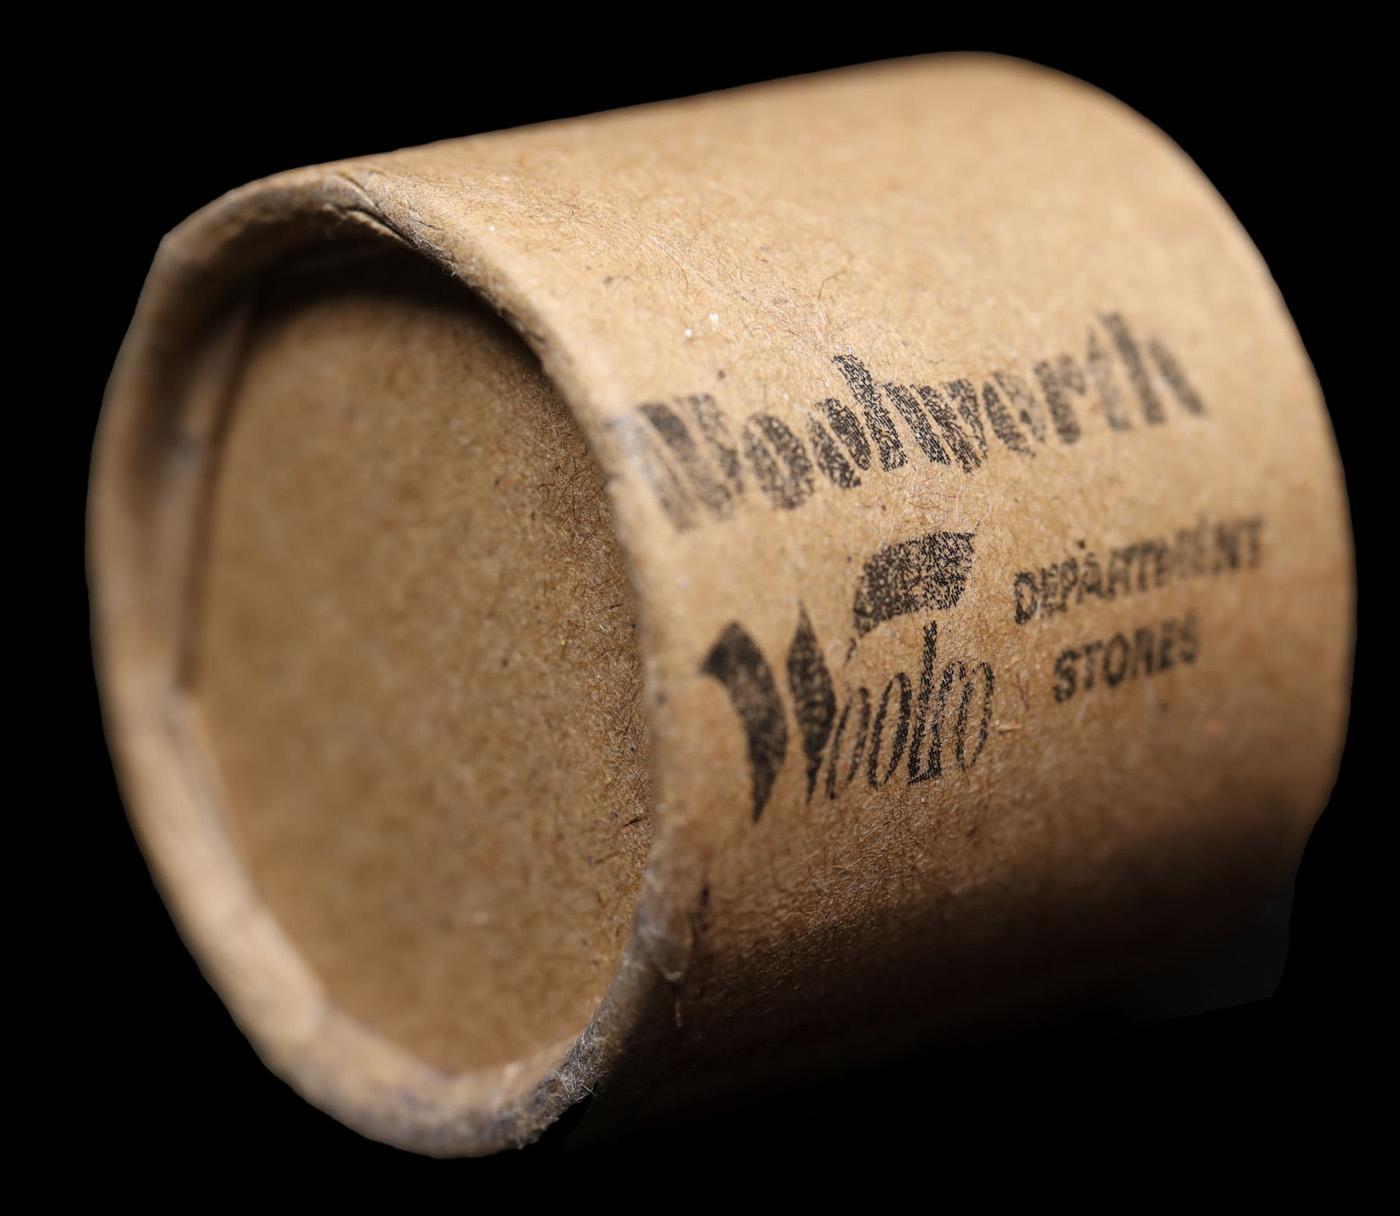 *Uncovered Hoard* - Covered End Roll - Marked "Unc Morgan Exceptional" - Weight shows x10 Coins (FC)